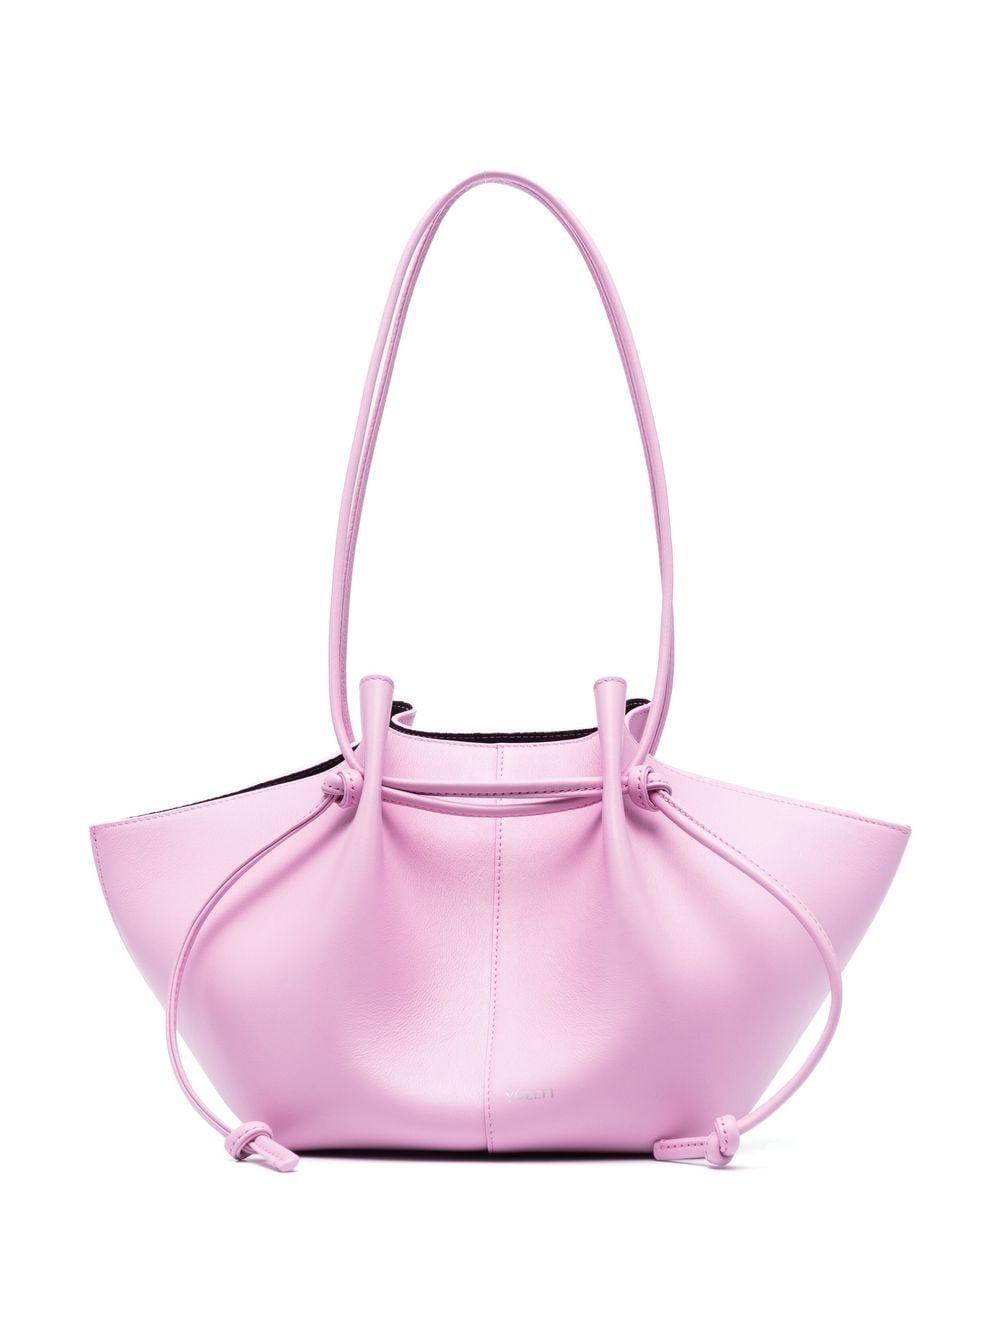 Yuzefi Mochi Leather Tote Bag in Pink | Lyst